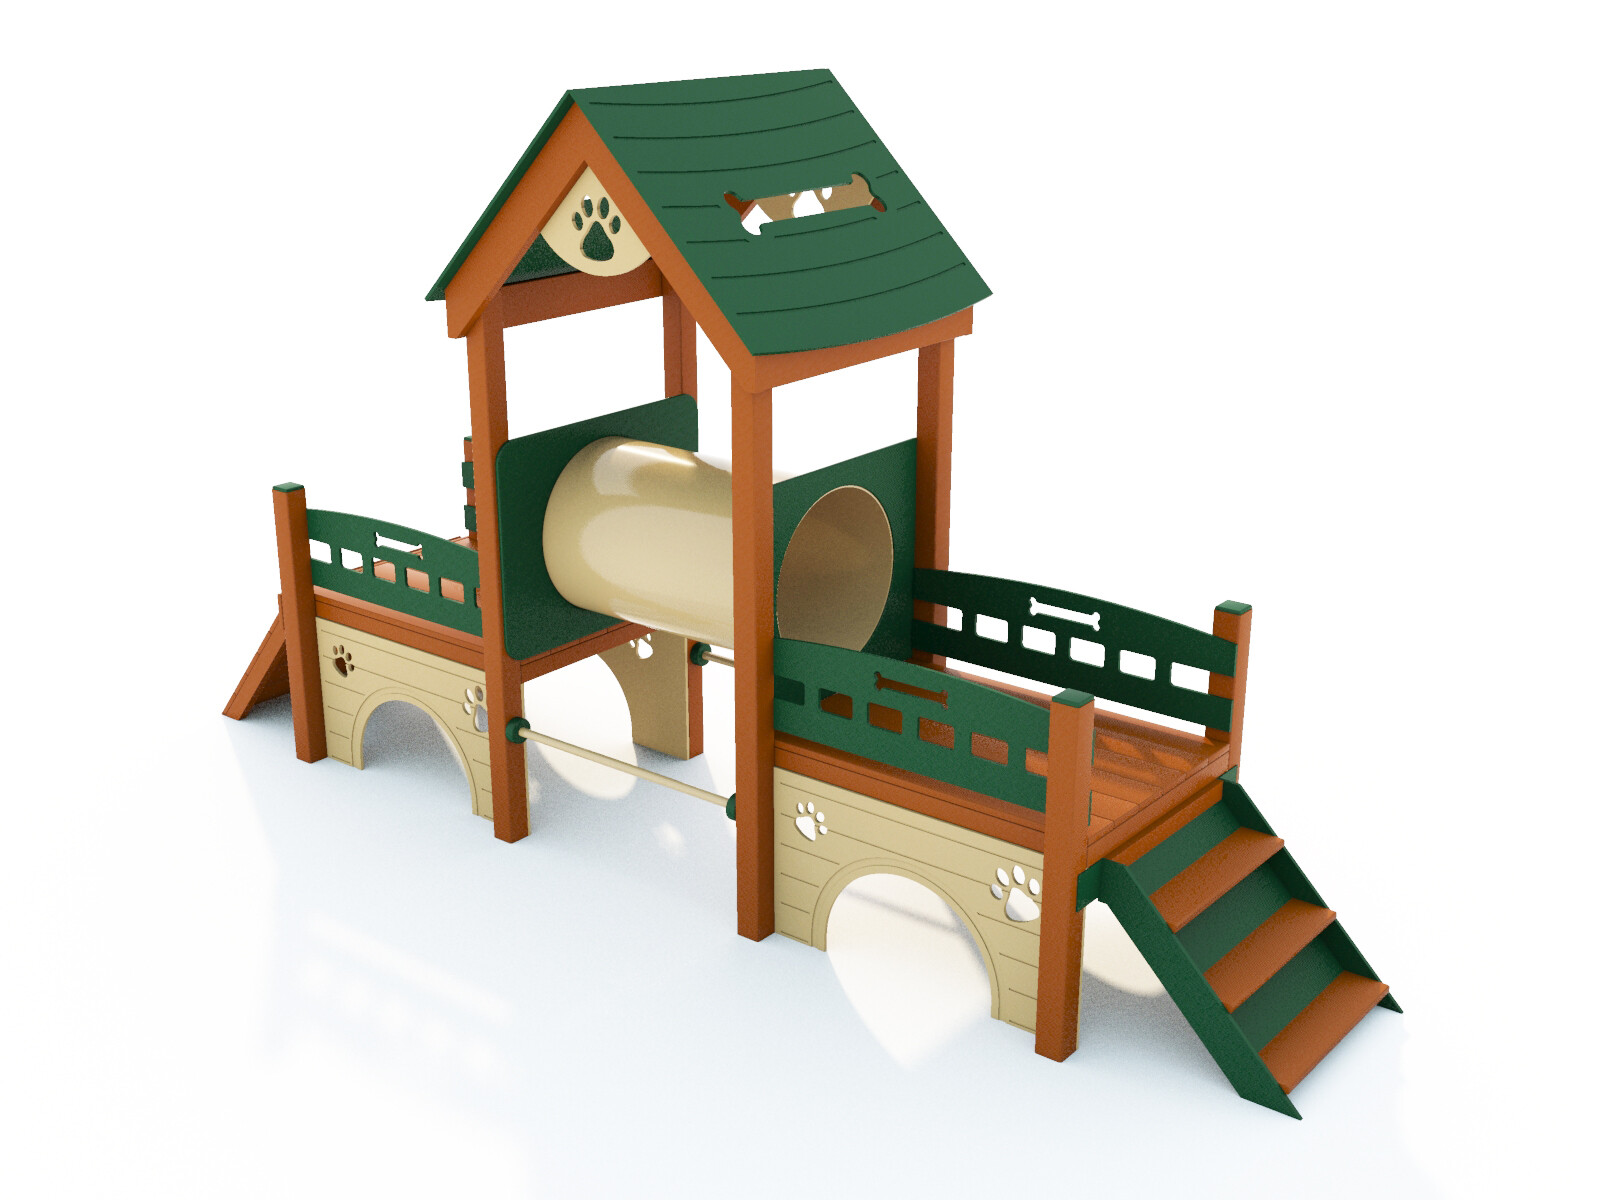 Eco-Friendly Dog Park Equipment & Supplies - KirbyBuilt Products